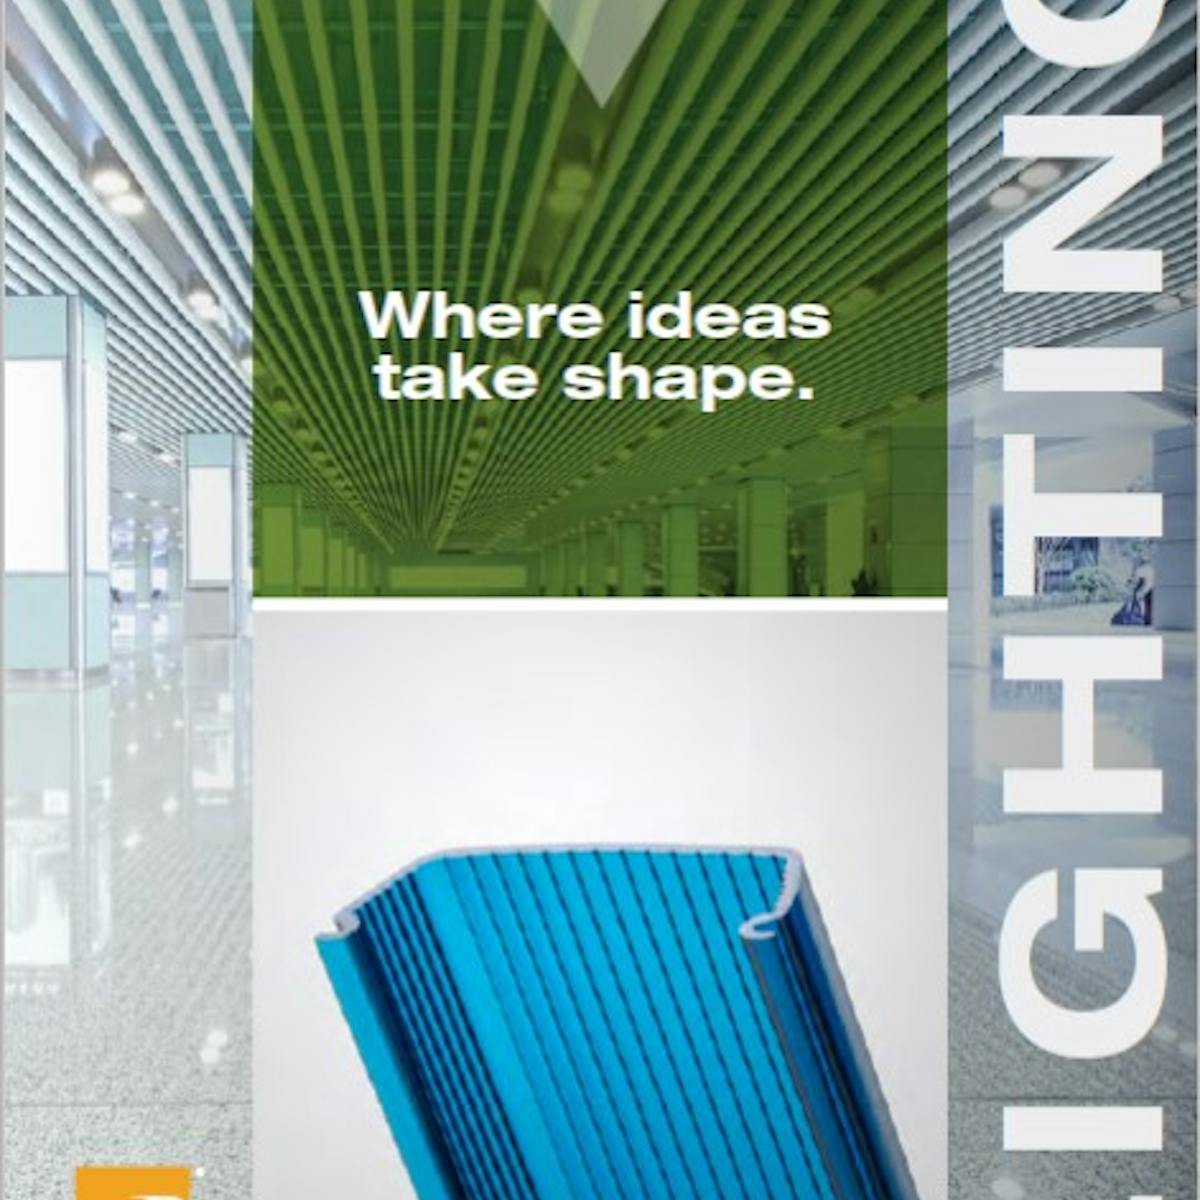 Visit www.pexco.com/lighting for more details on Pexco&apos;s lighting products and capabilities.